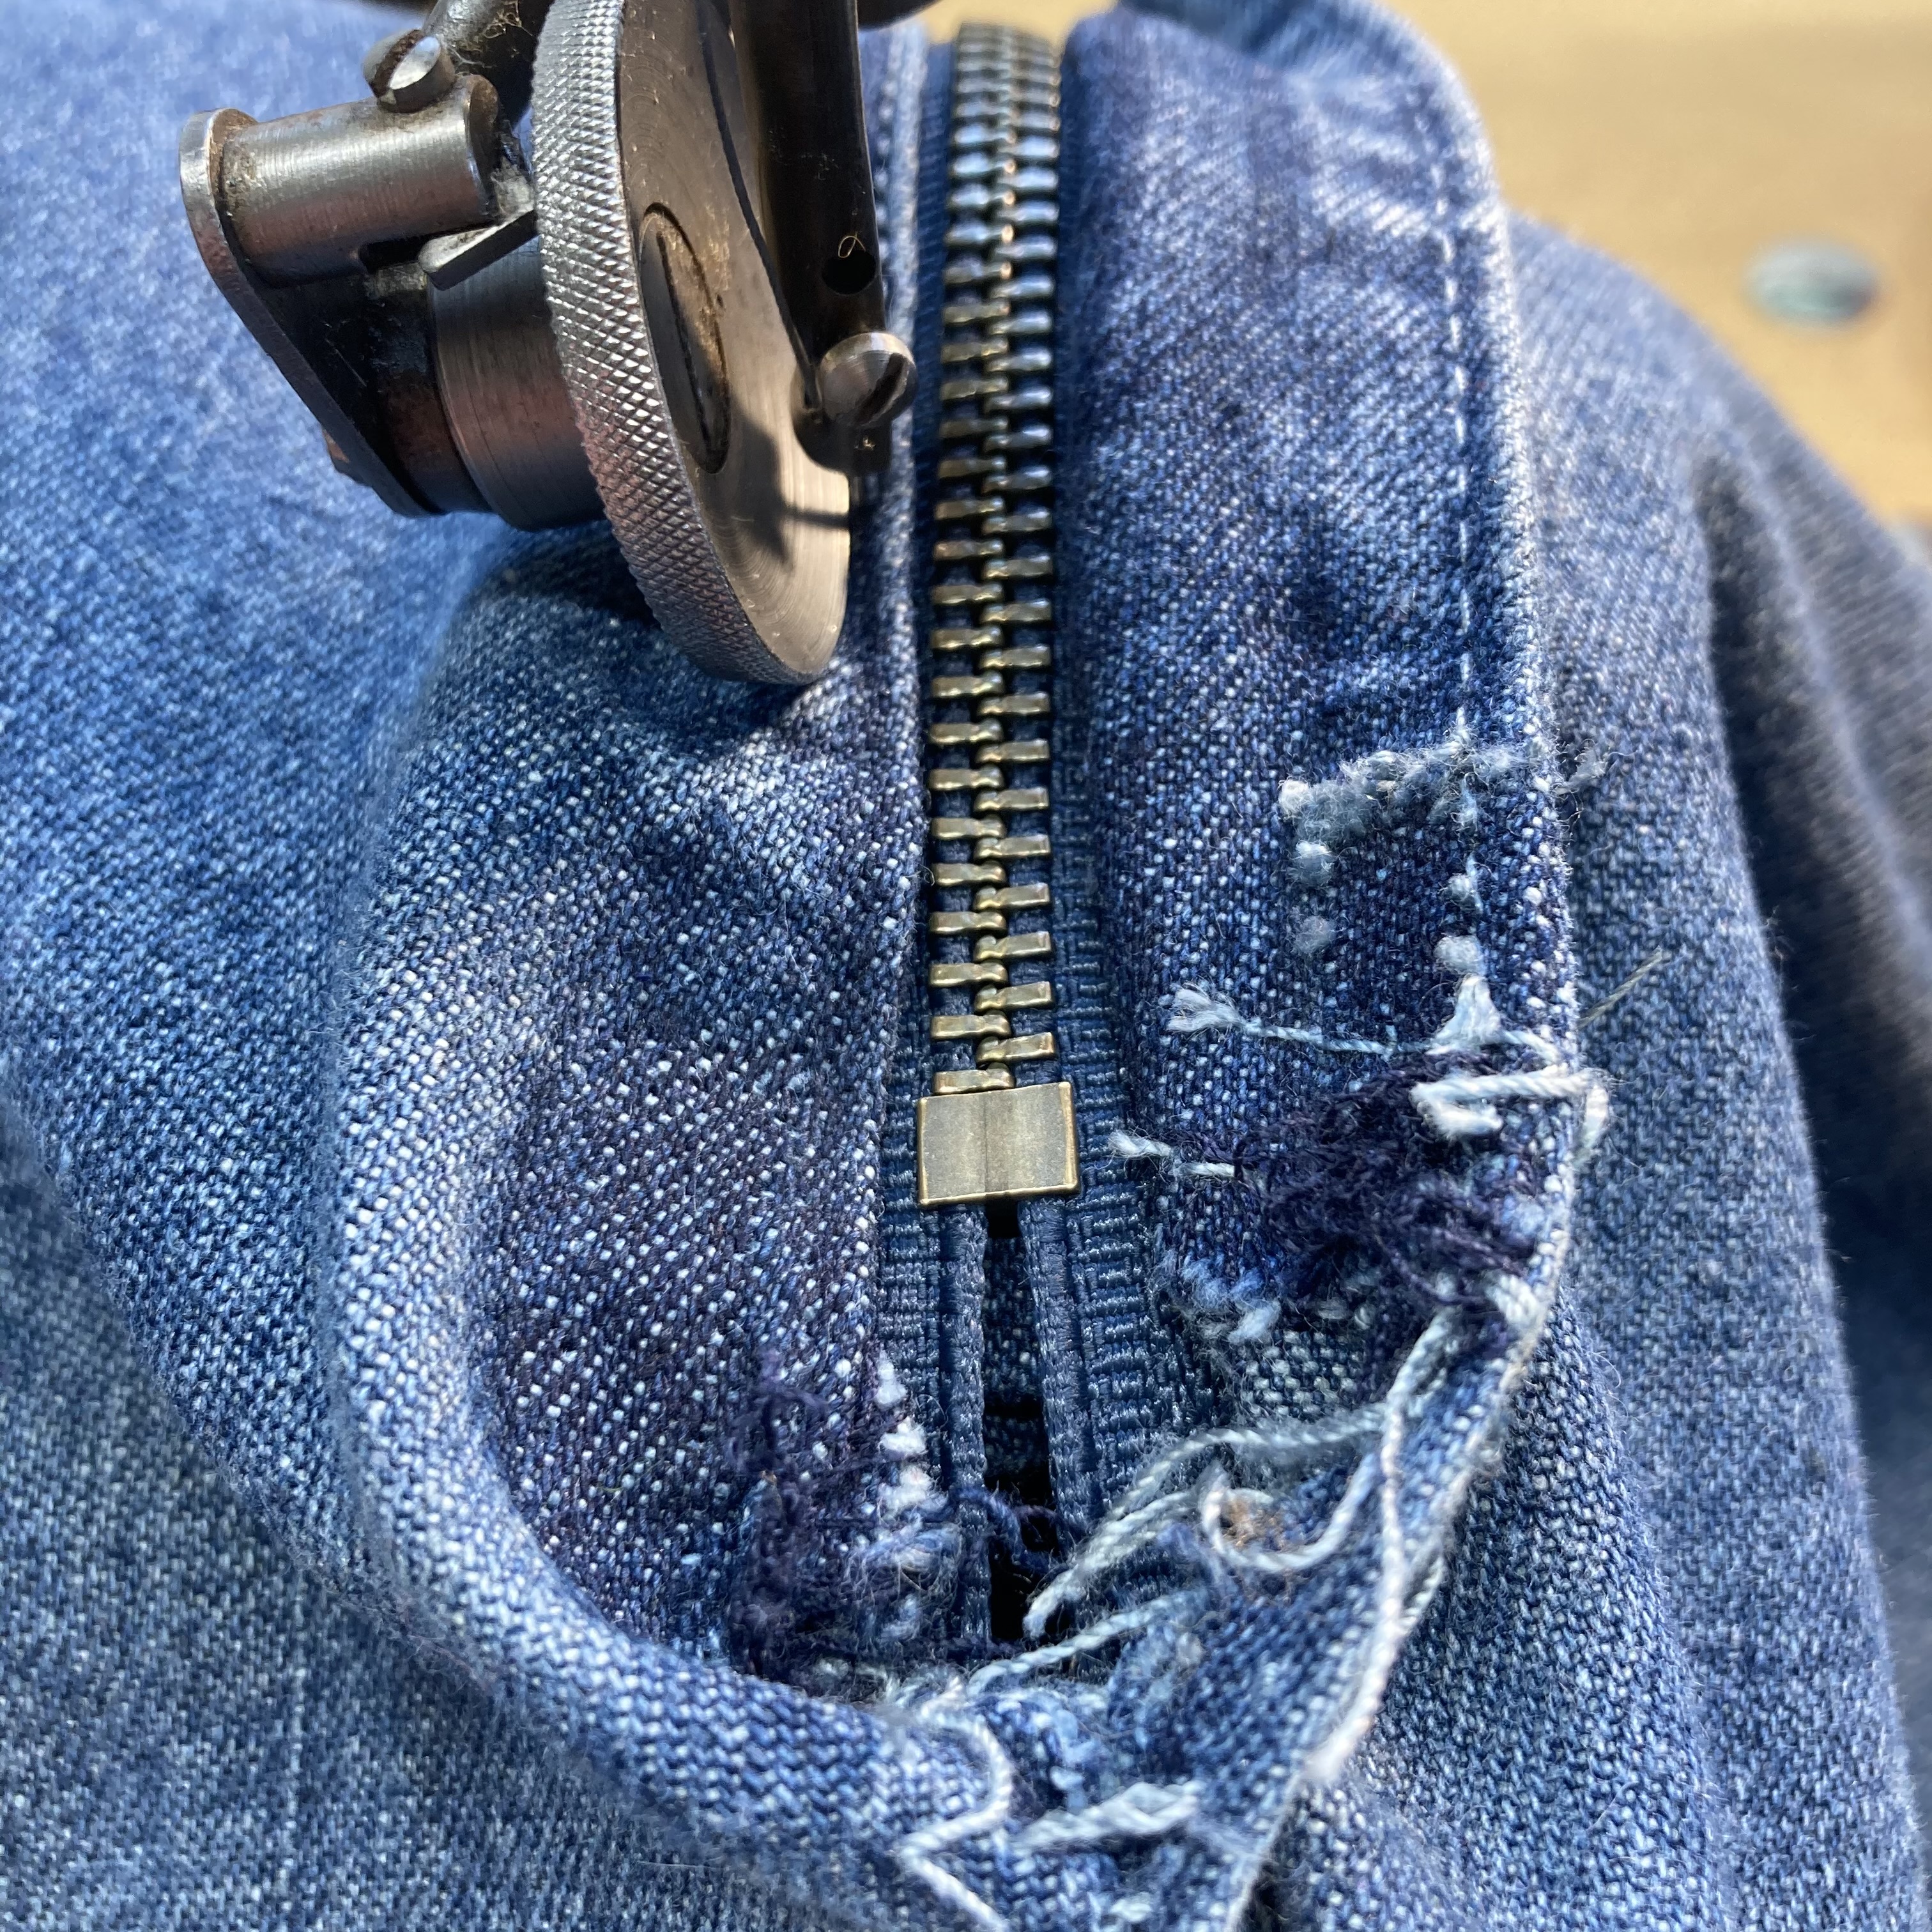 An image of the fly on a pair of blue jeans being replaced.